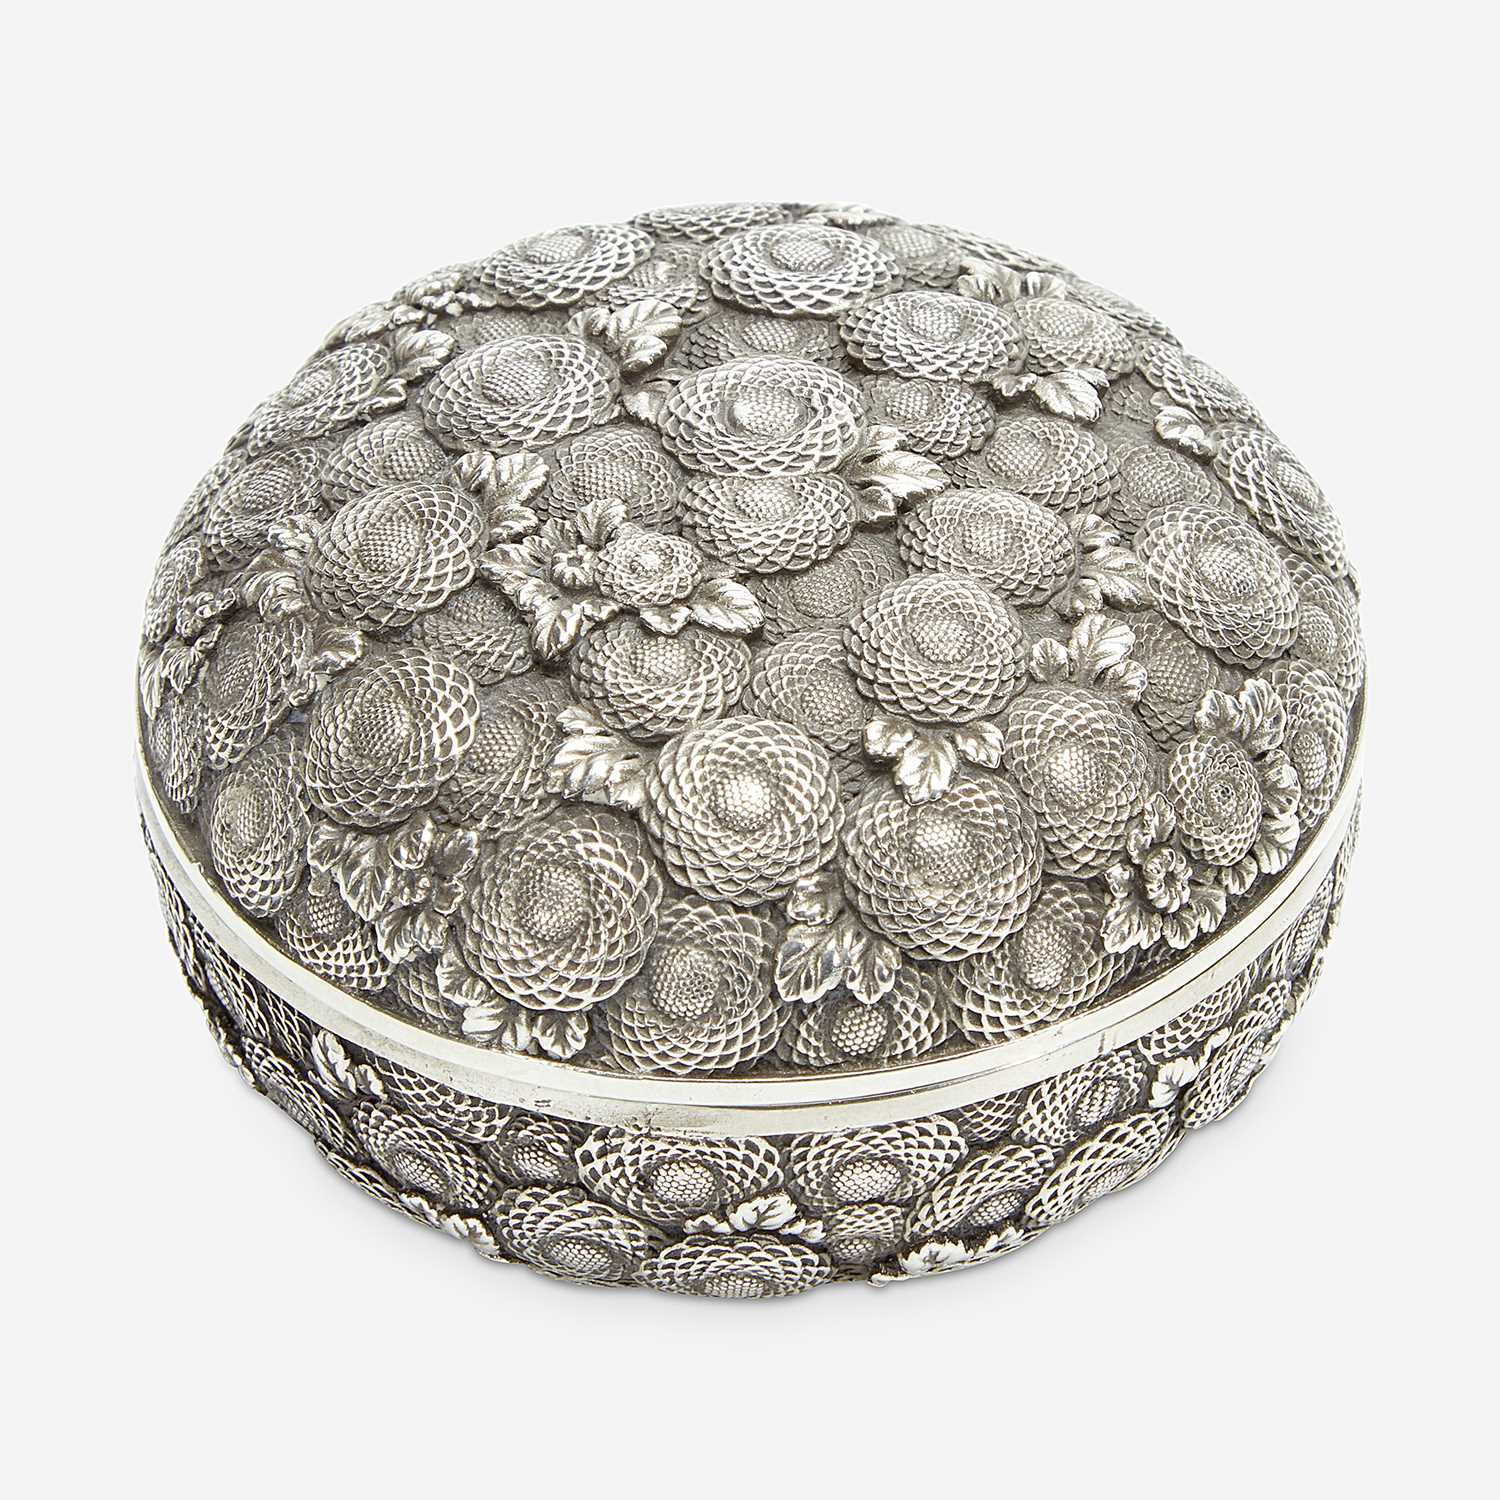 Lot 126 - A finely-executed Japanese silver incense box and cover, Kogo